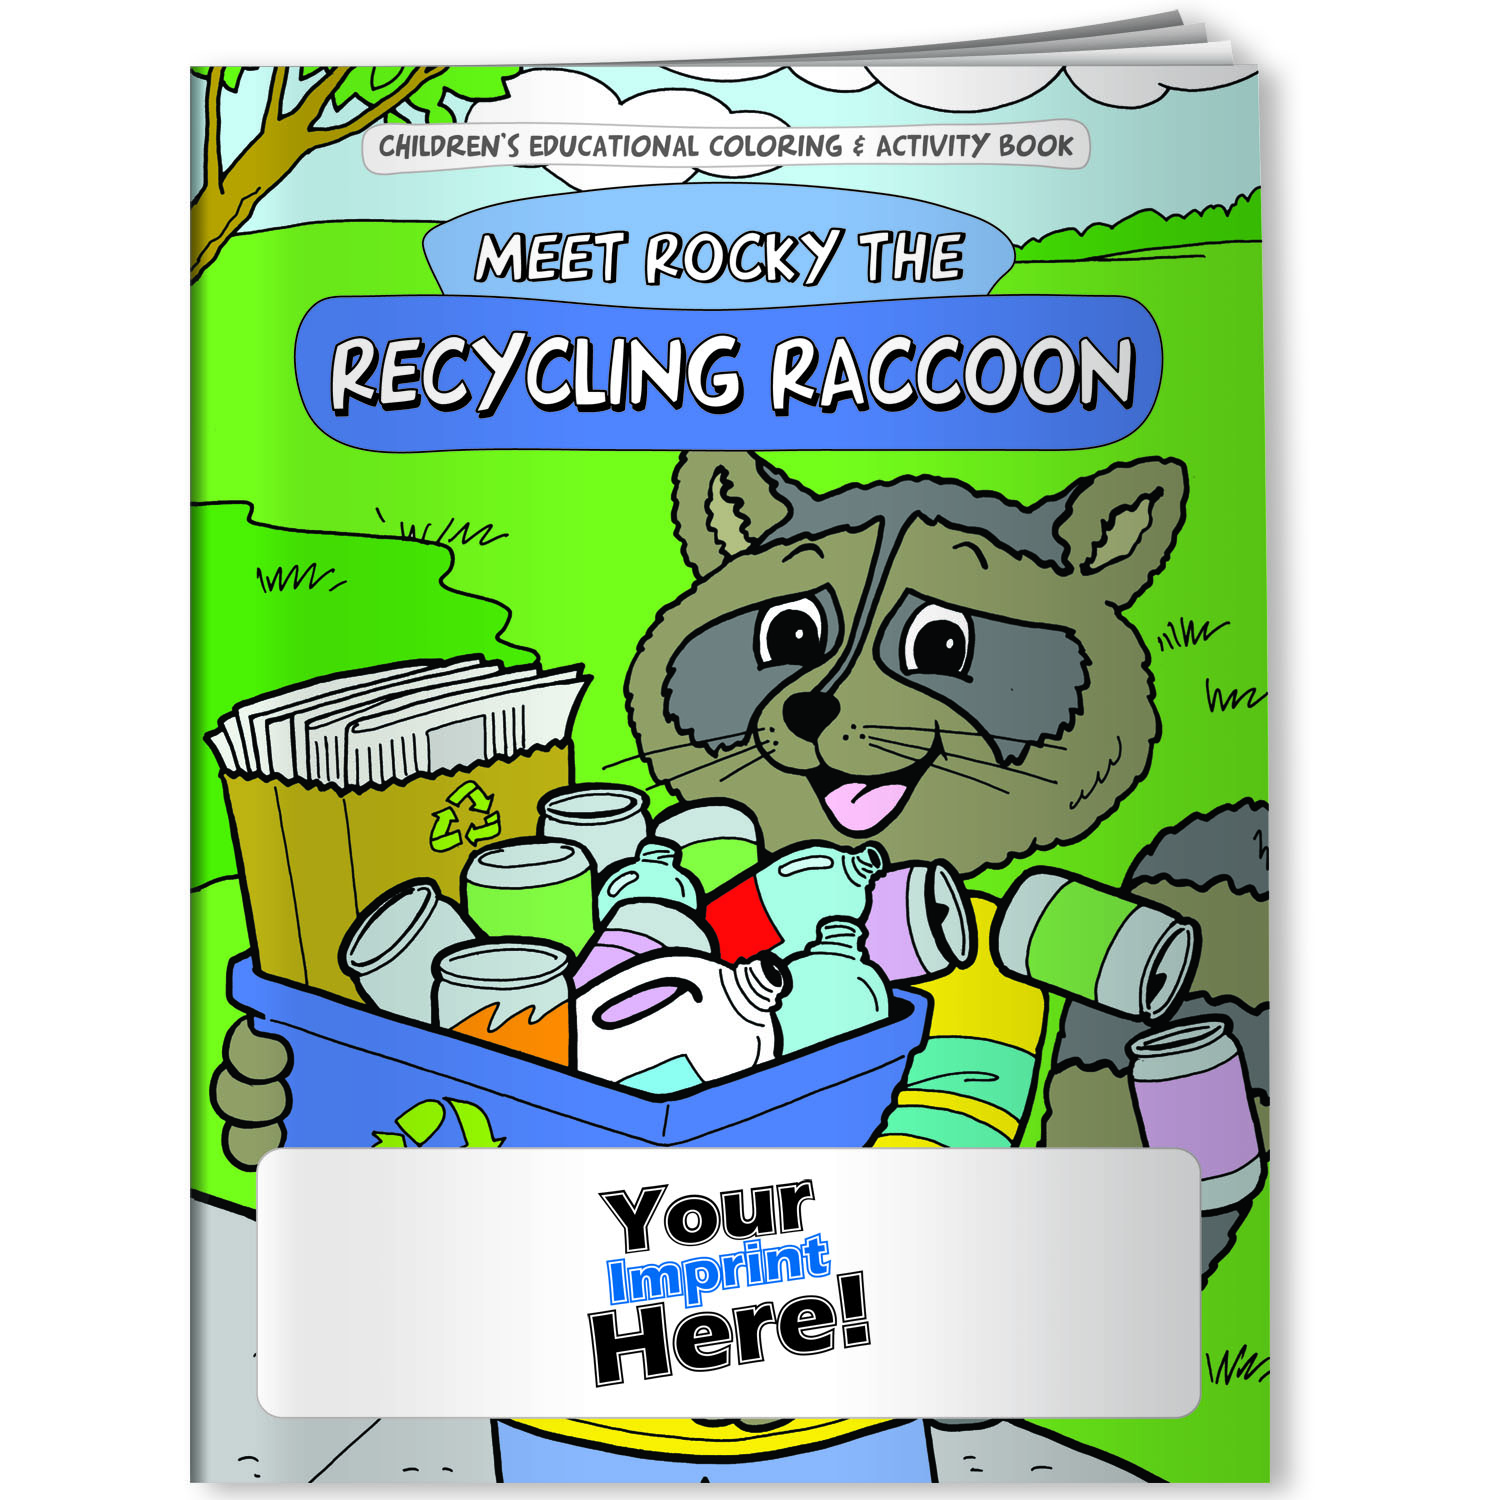 Personalized Coloring Books USA Made Recycling Activity Books